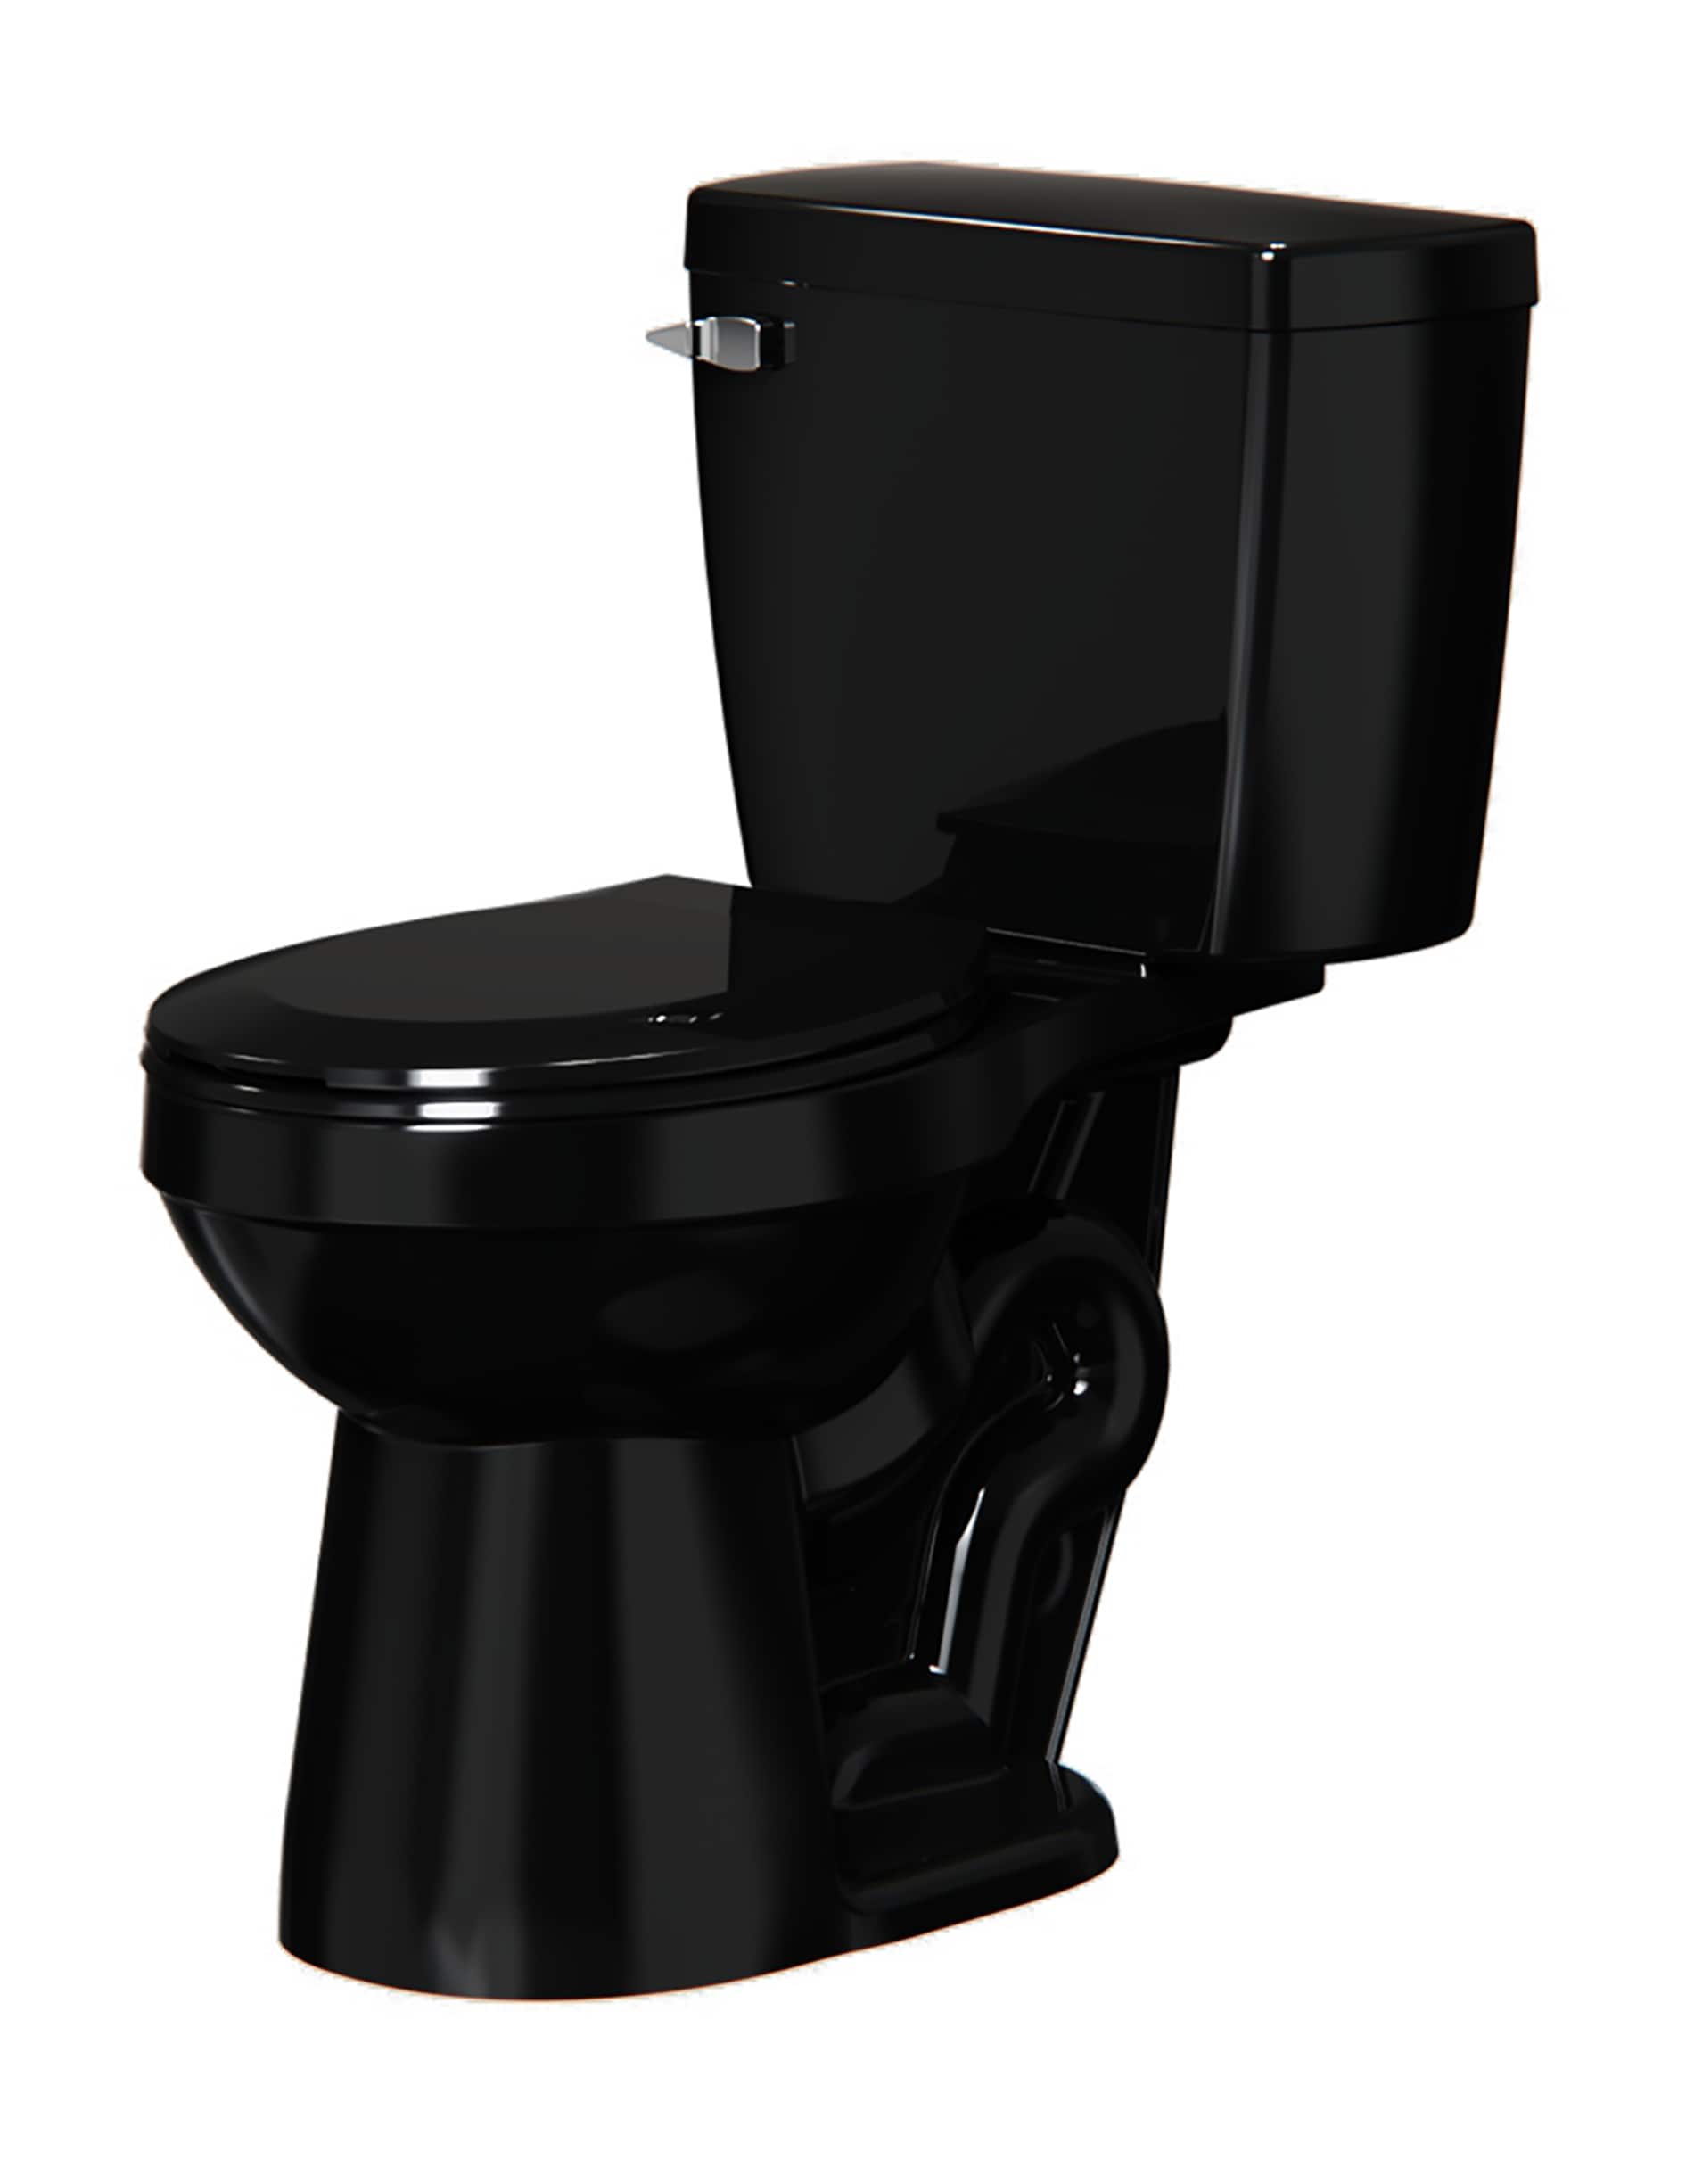 Buy Black Toilets Online at a low prize at